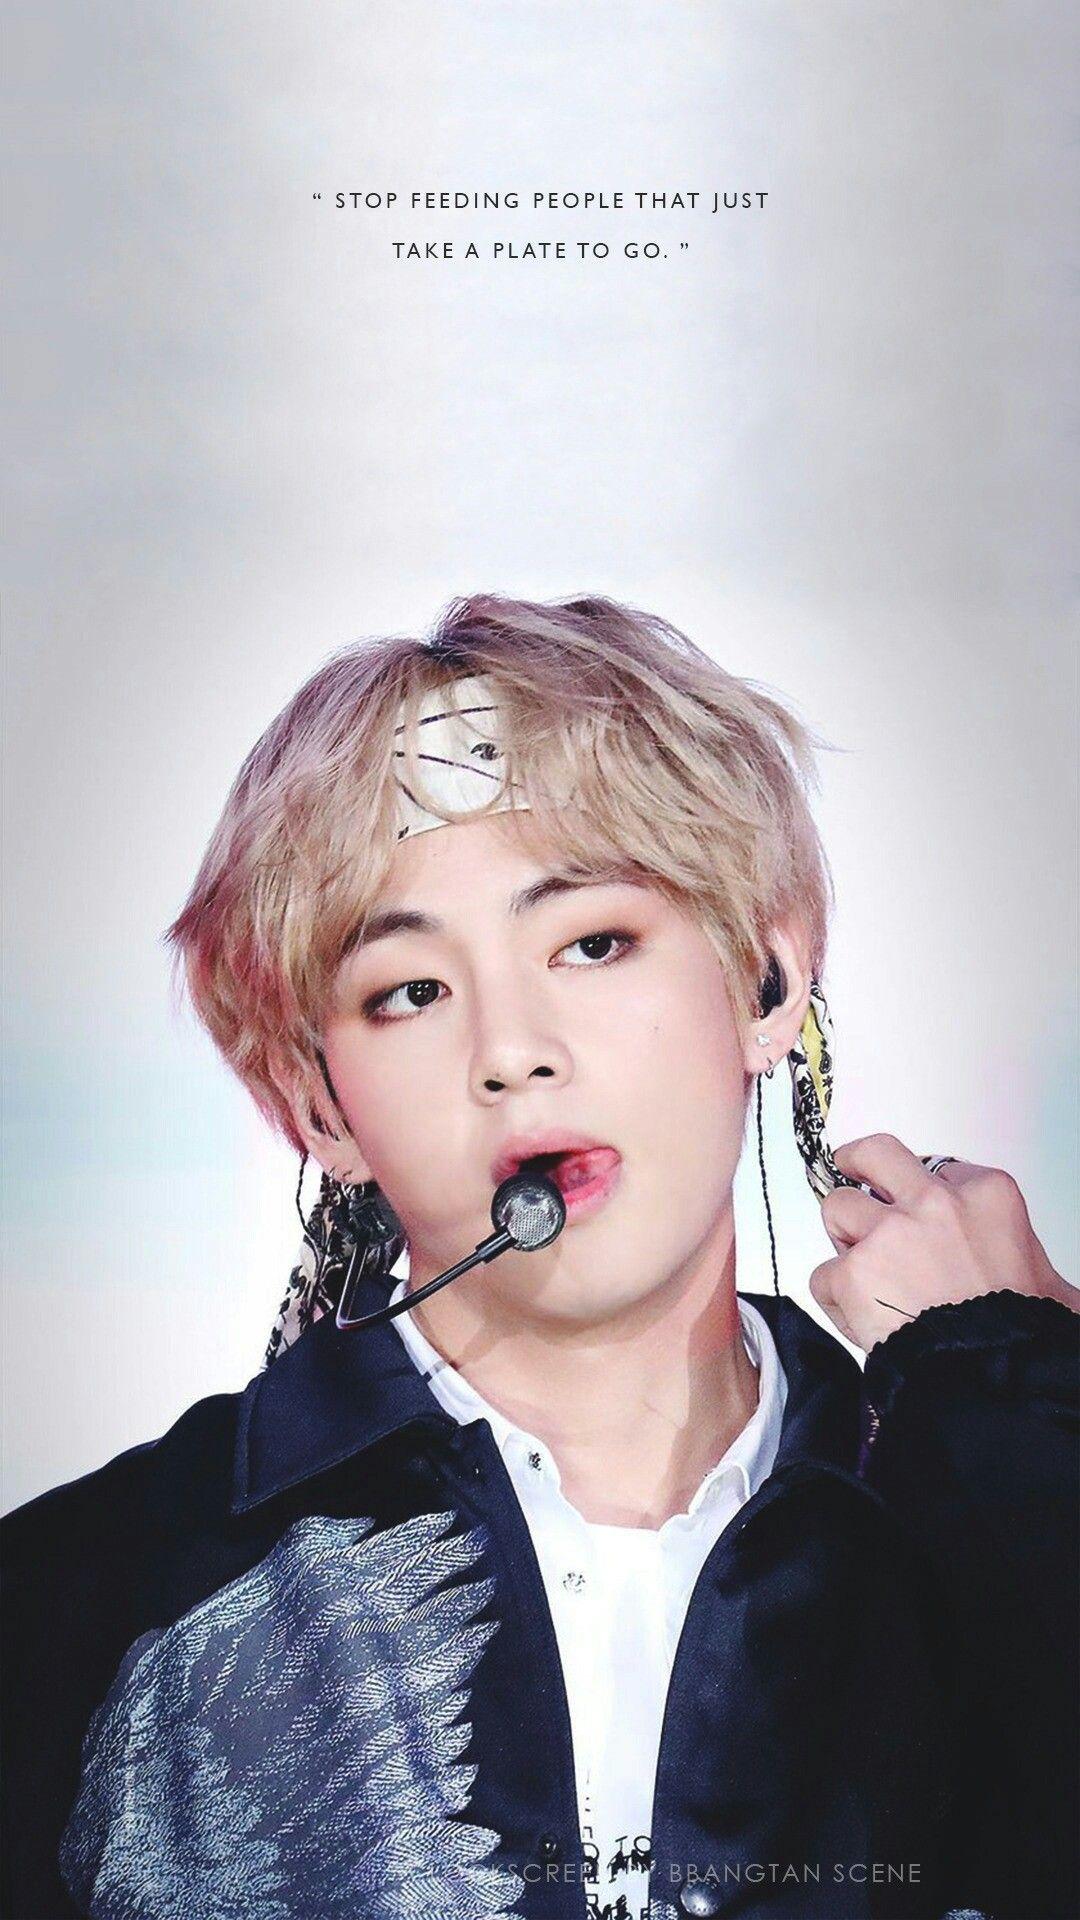 V Bts Cute : What is the full name of BTS V? - Quora - Discover images